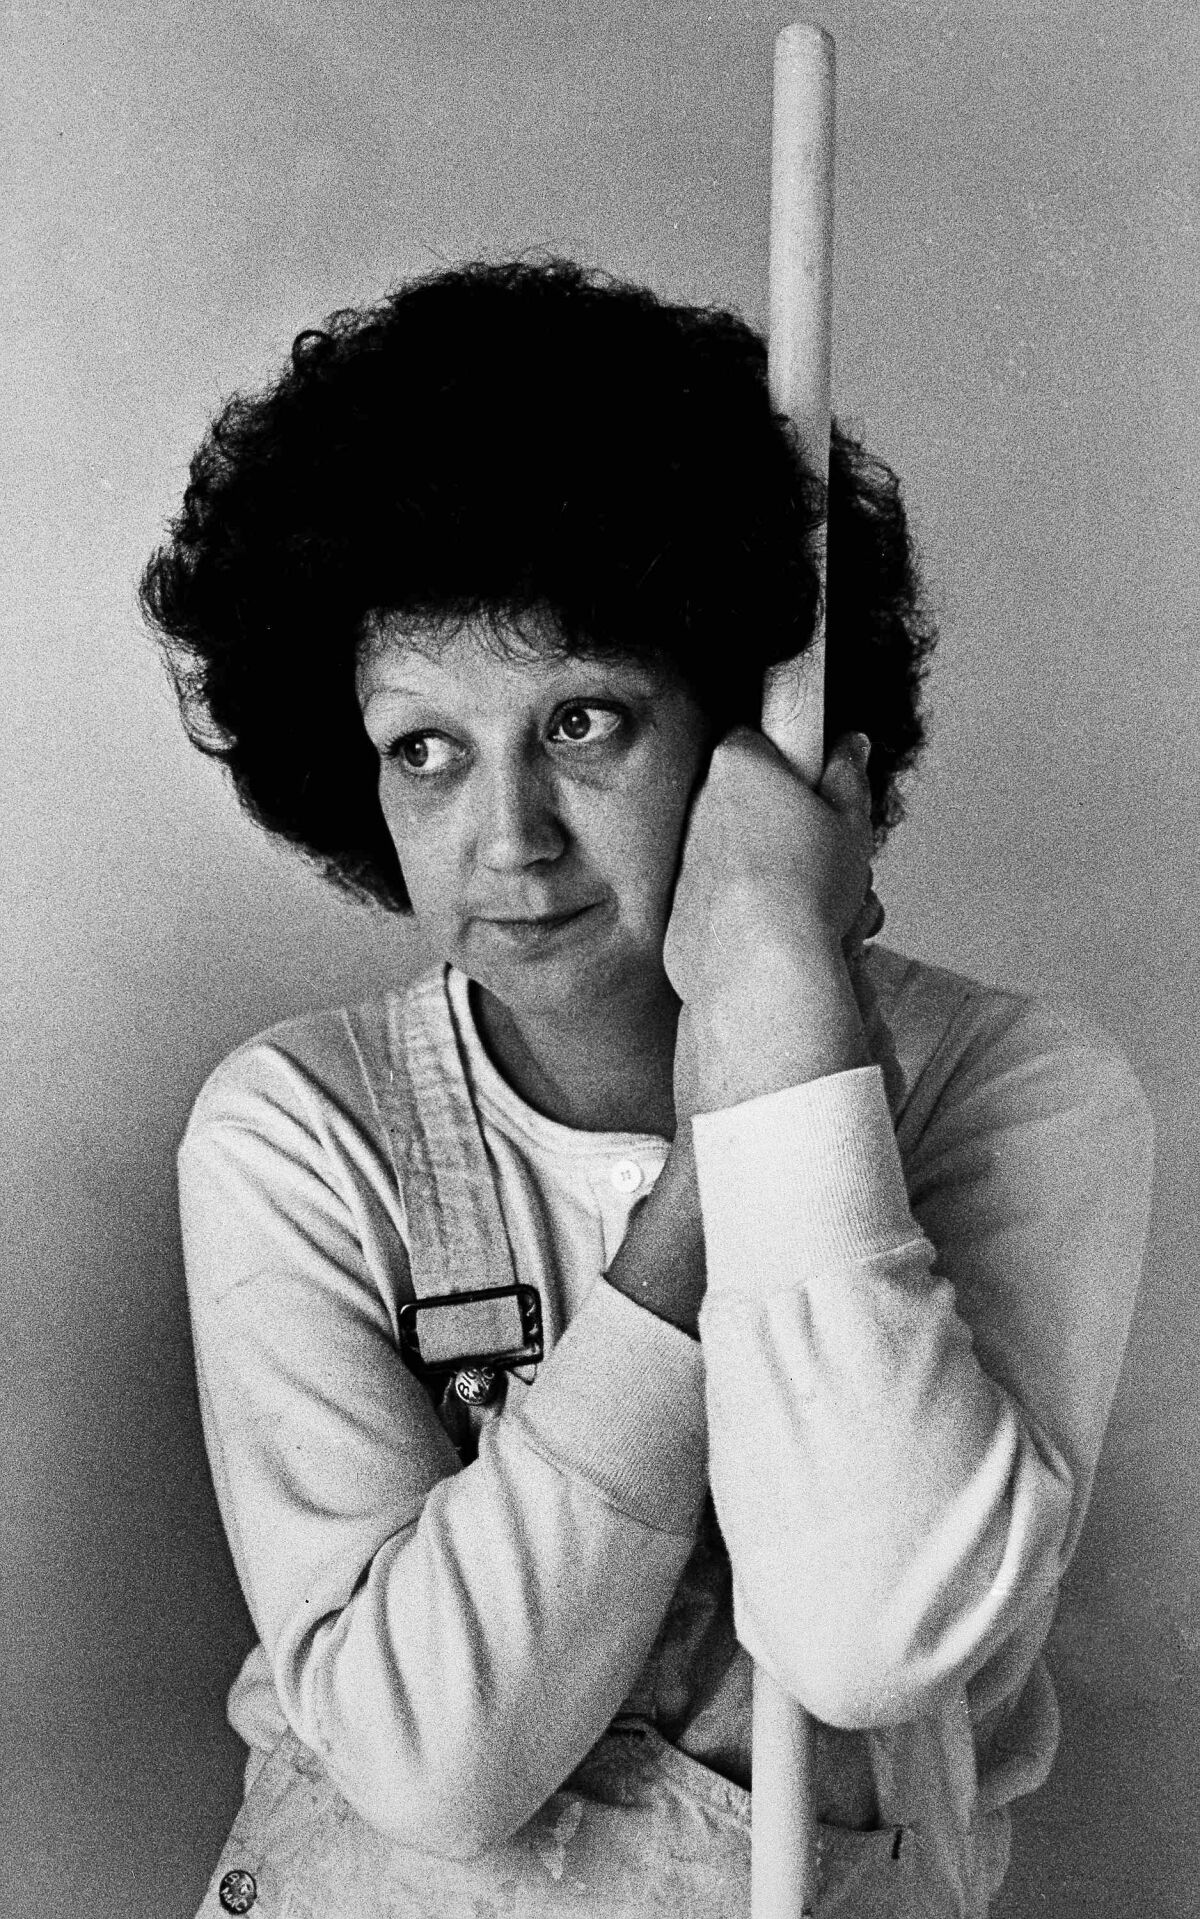 Norma McCorvey, 35, the Dallas mother whose desire to have an abortion was the basis for a landmark Supreme Court decision a decade ago, takes time from her job as a house painter to pose for a photograph in Terrell, Texas, on Thursday, Jan. 21, 1983. To legal scholars, she is simply "Jane Roe."